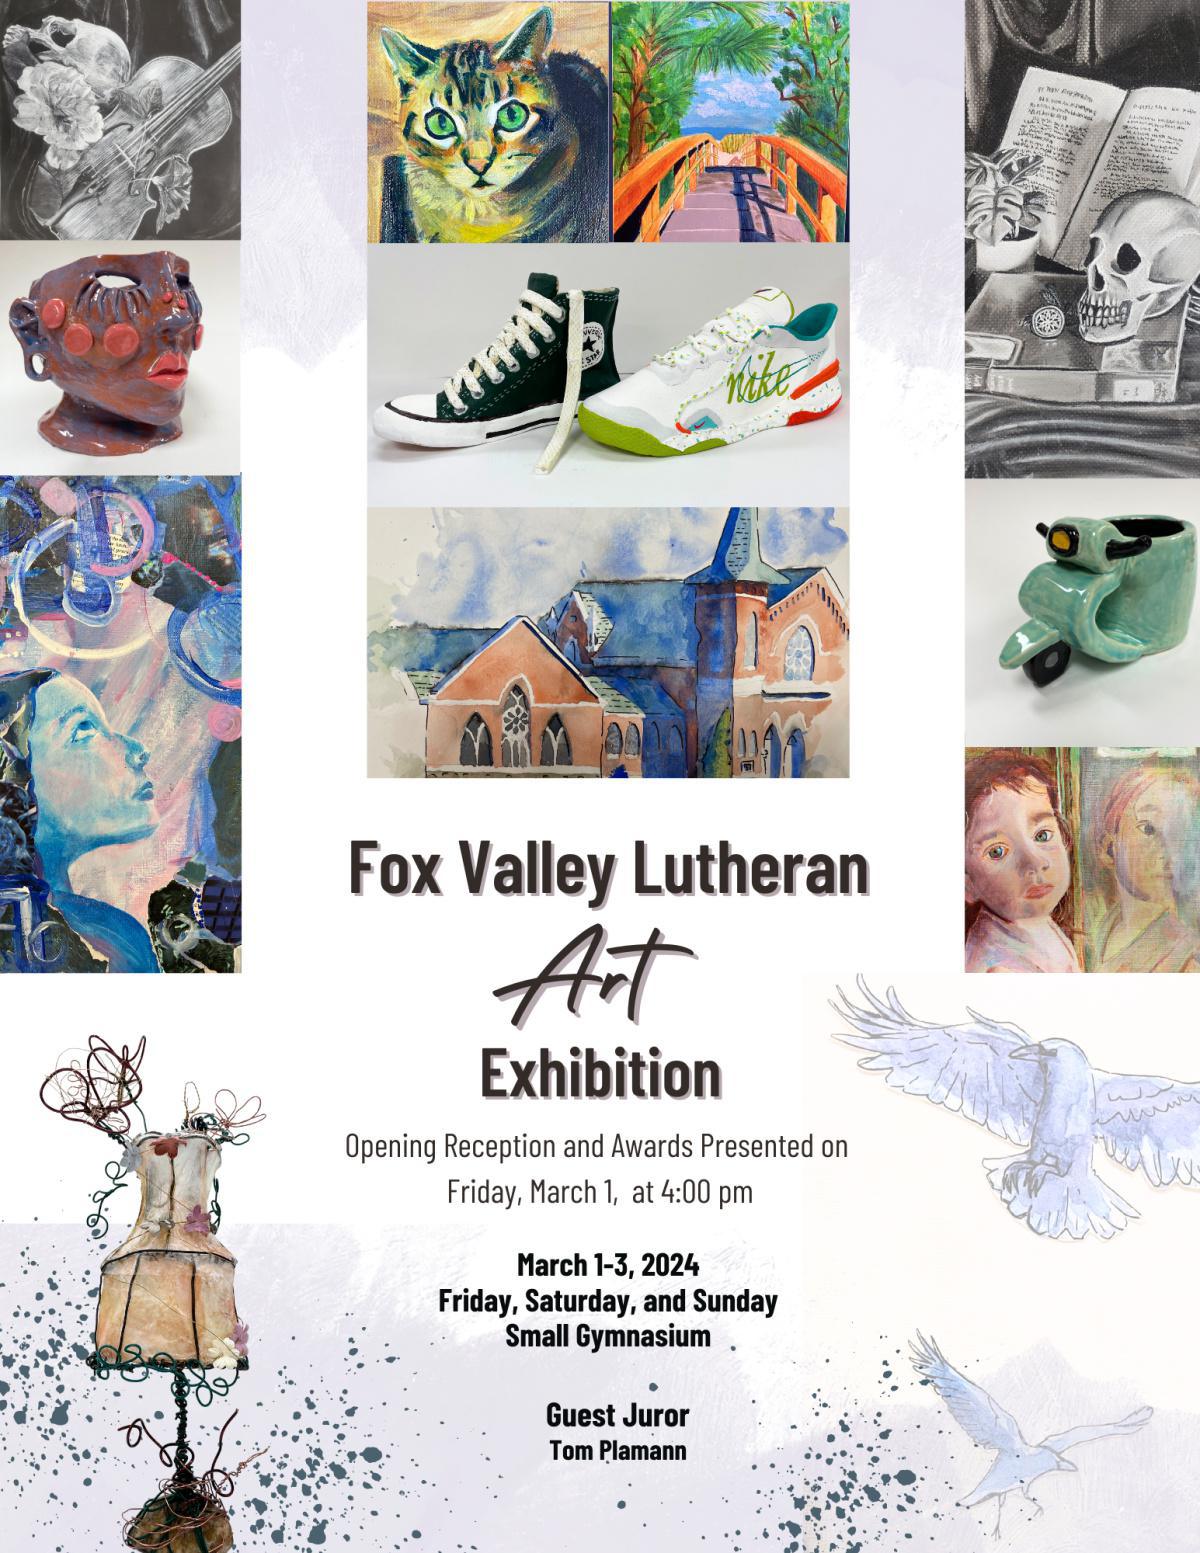 Student Art Exhibition at FVL March 1-3